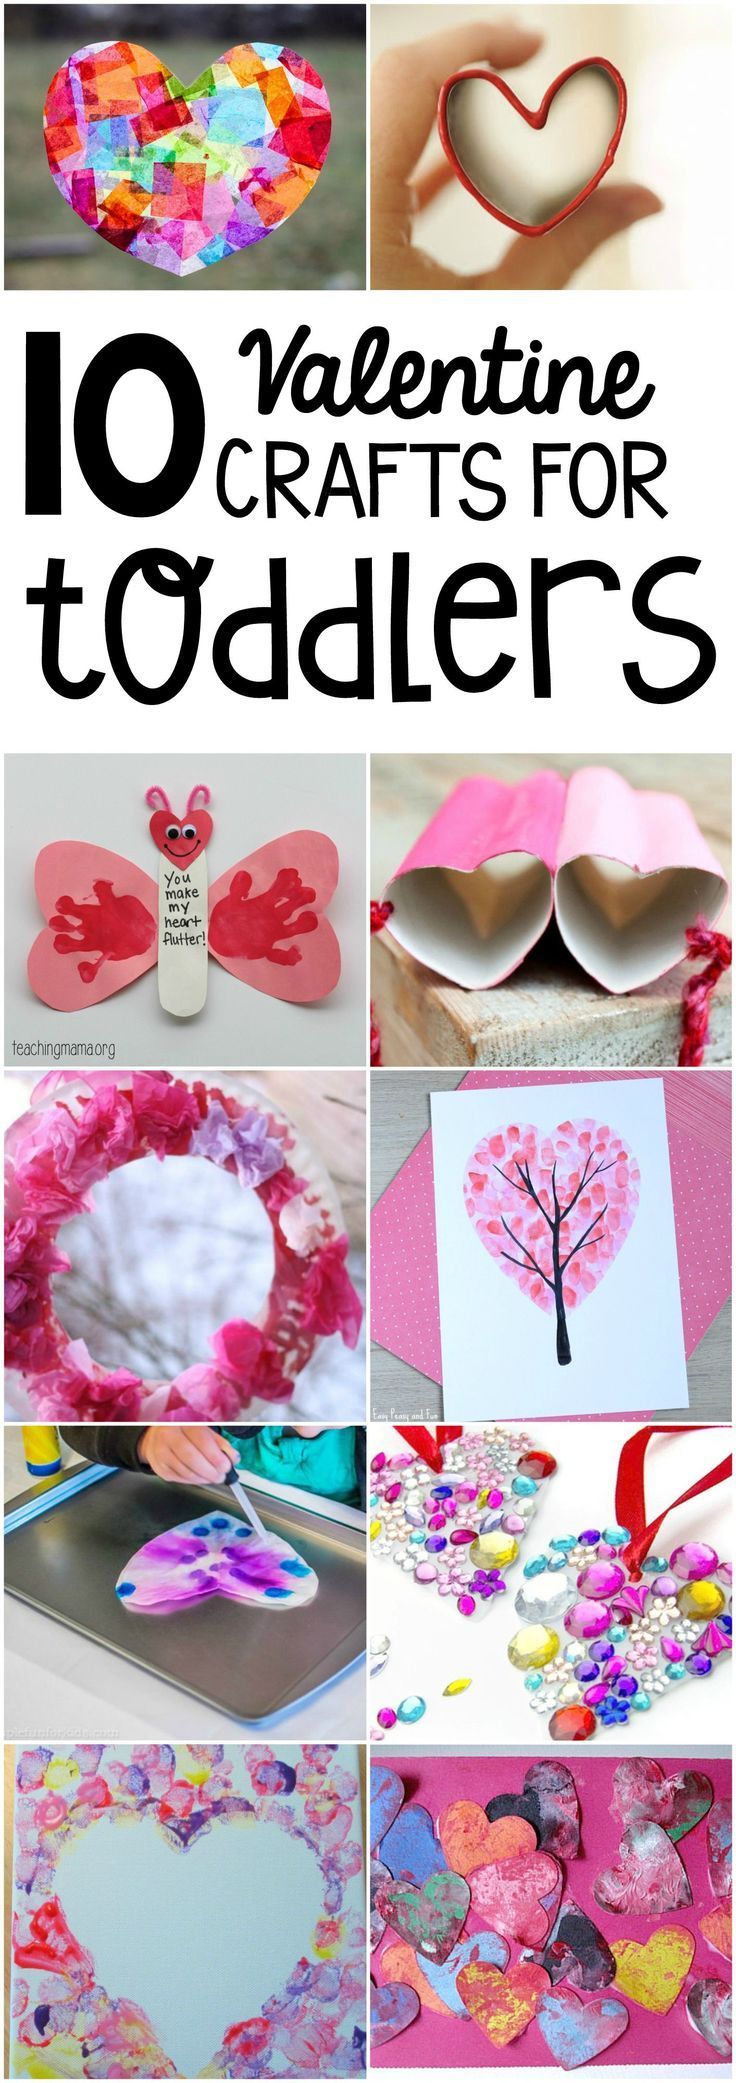 10 Valentine Crafts for Toddlers -   24 arts and caft
 ideas